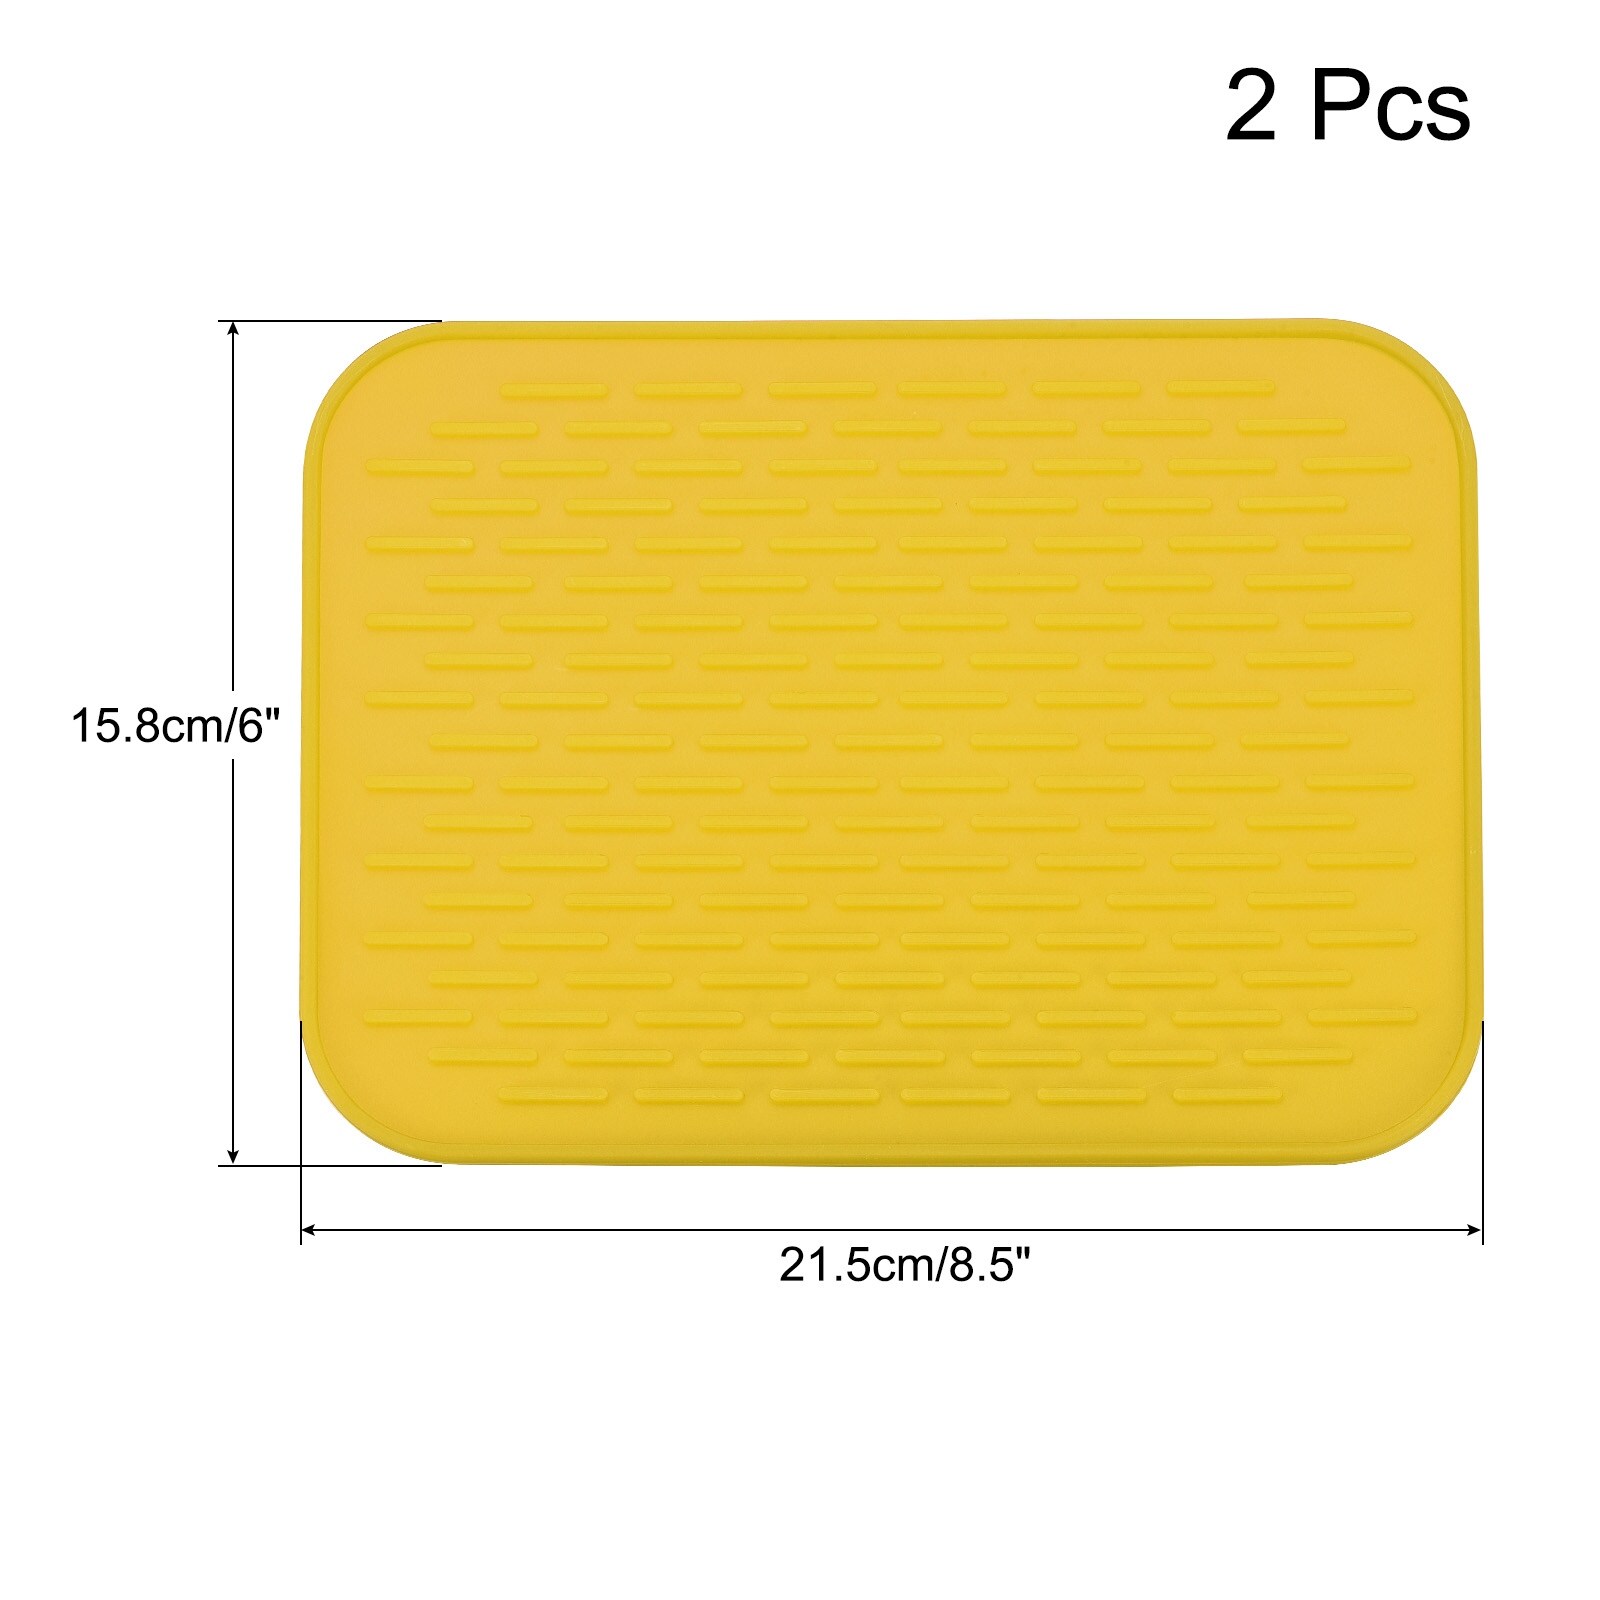 https://ak1.ostkcdn.com/images/products/is/images/direct/ce42e7085dde272c67fb71437a9bc3cf205d21e6/Dish-Drying-Mat-Set-Under-Sink-Drain-Pad-Heat-Resistant-Suitable-for-K.jpg